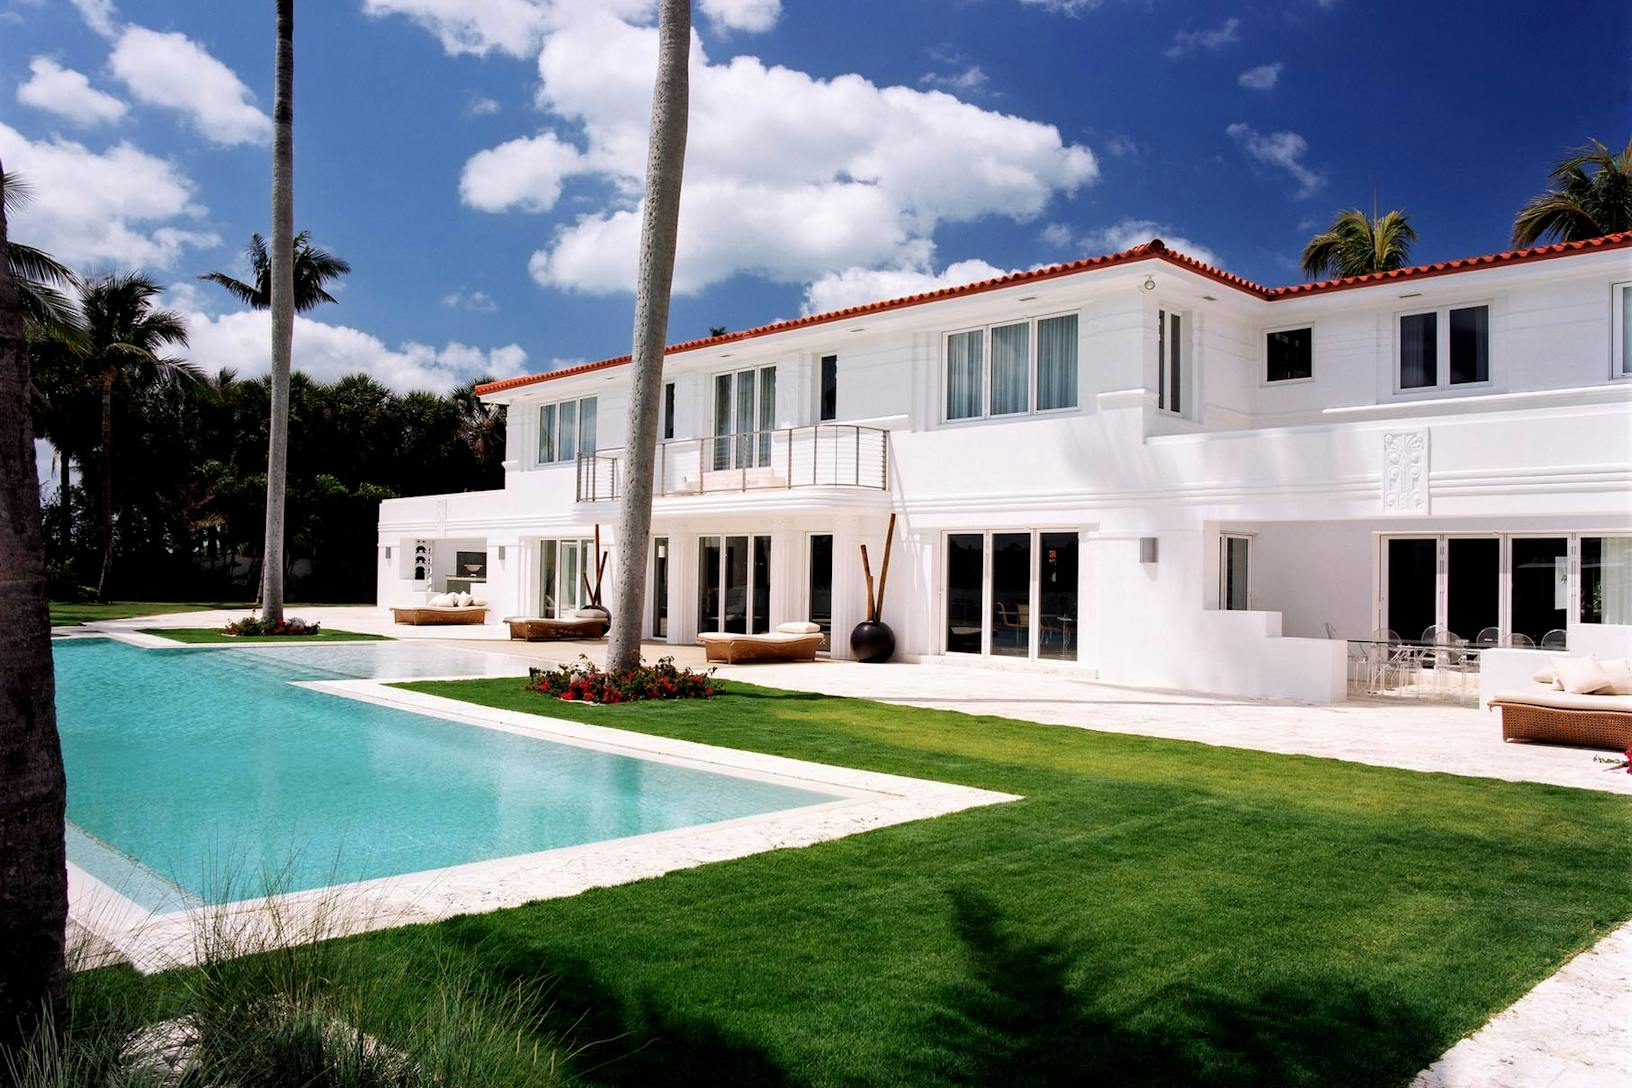 SL73 Large white house with pool exterior - Extreme weather resistance glass walls